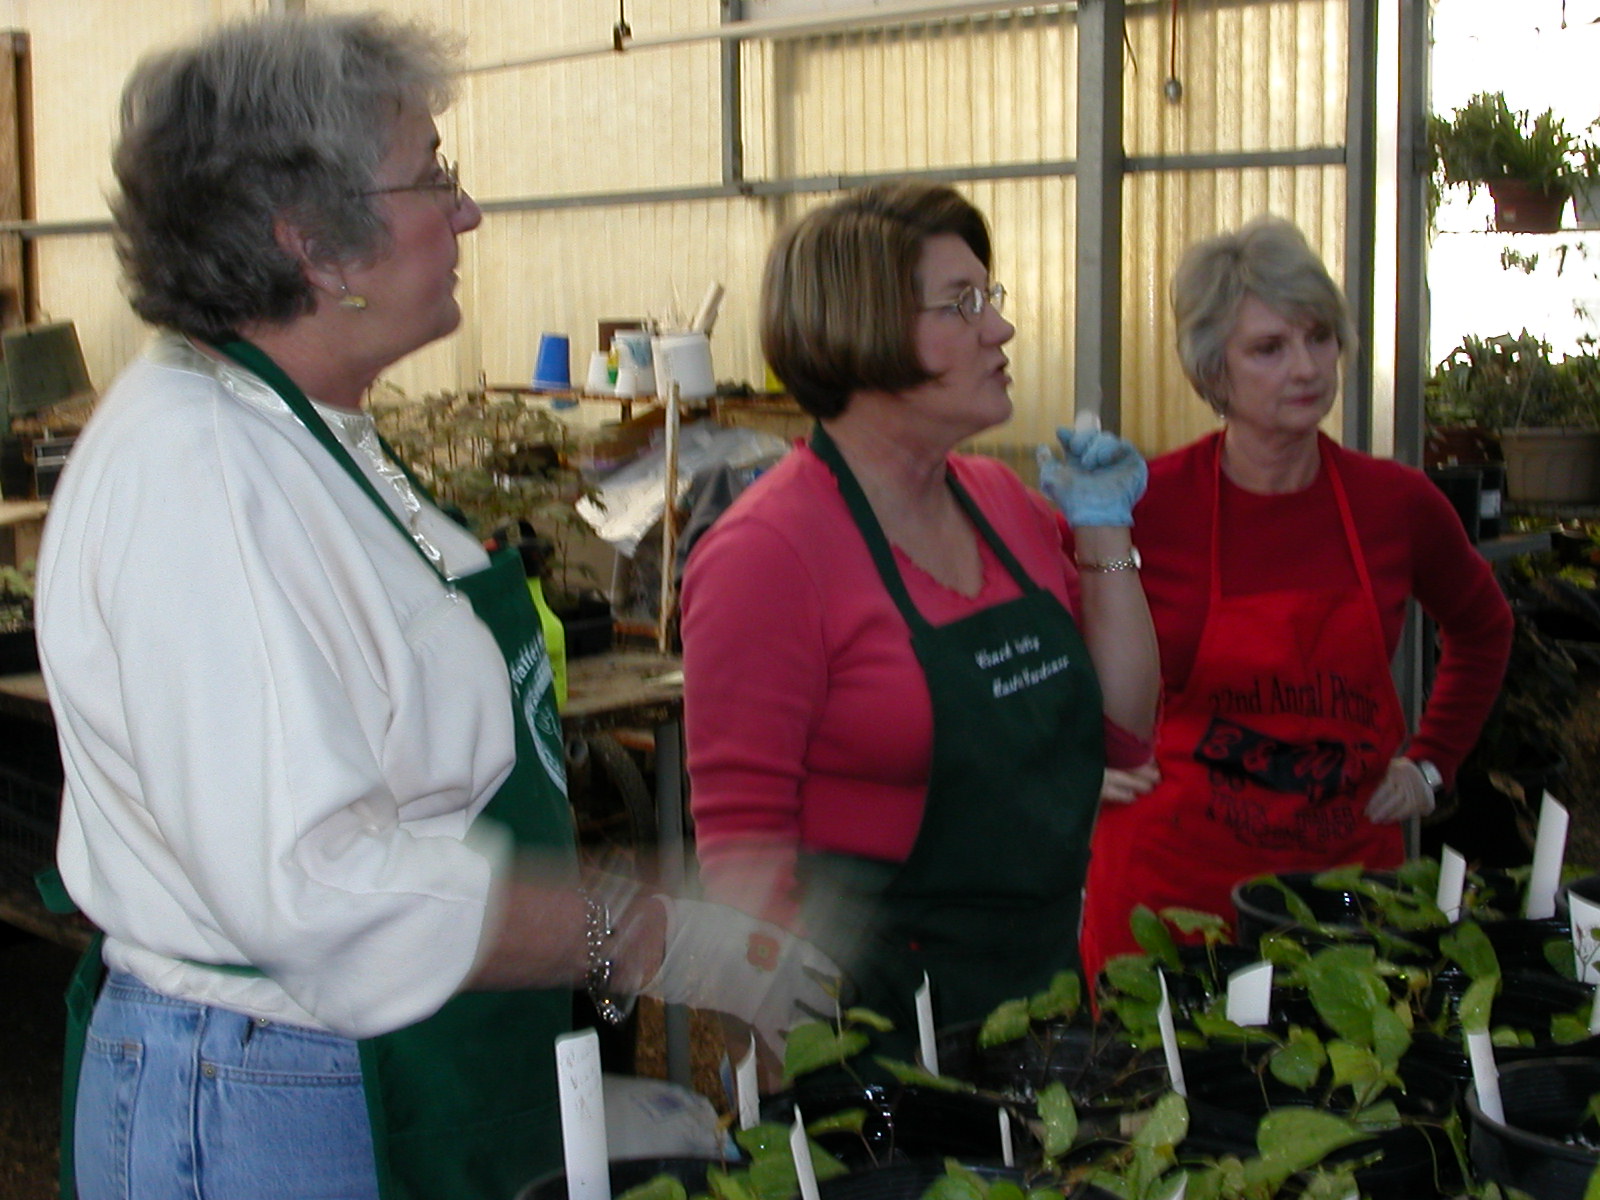 Propagating plants in the greenhouse to prepare for the annual Master Gardener plant sale.